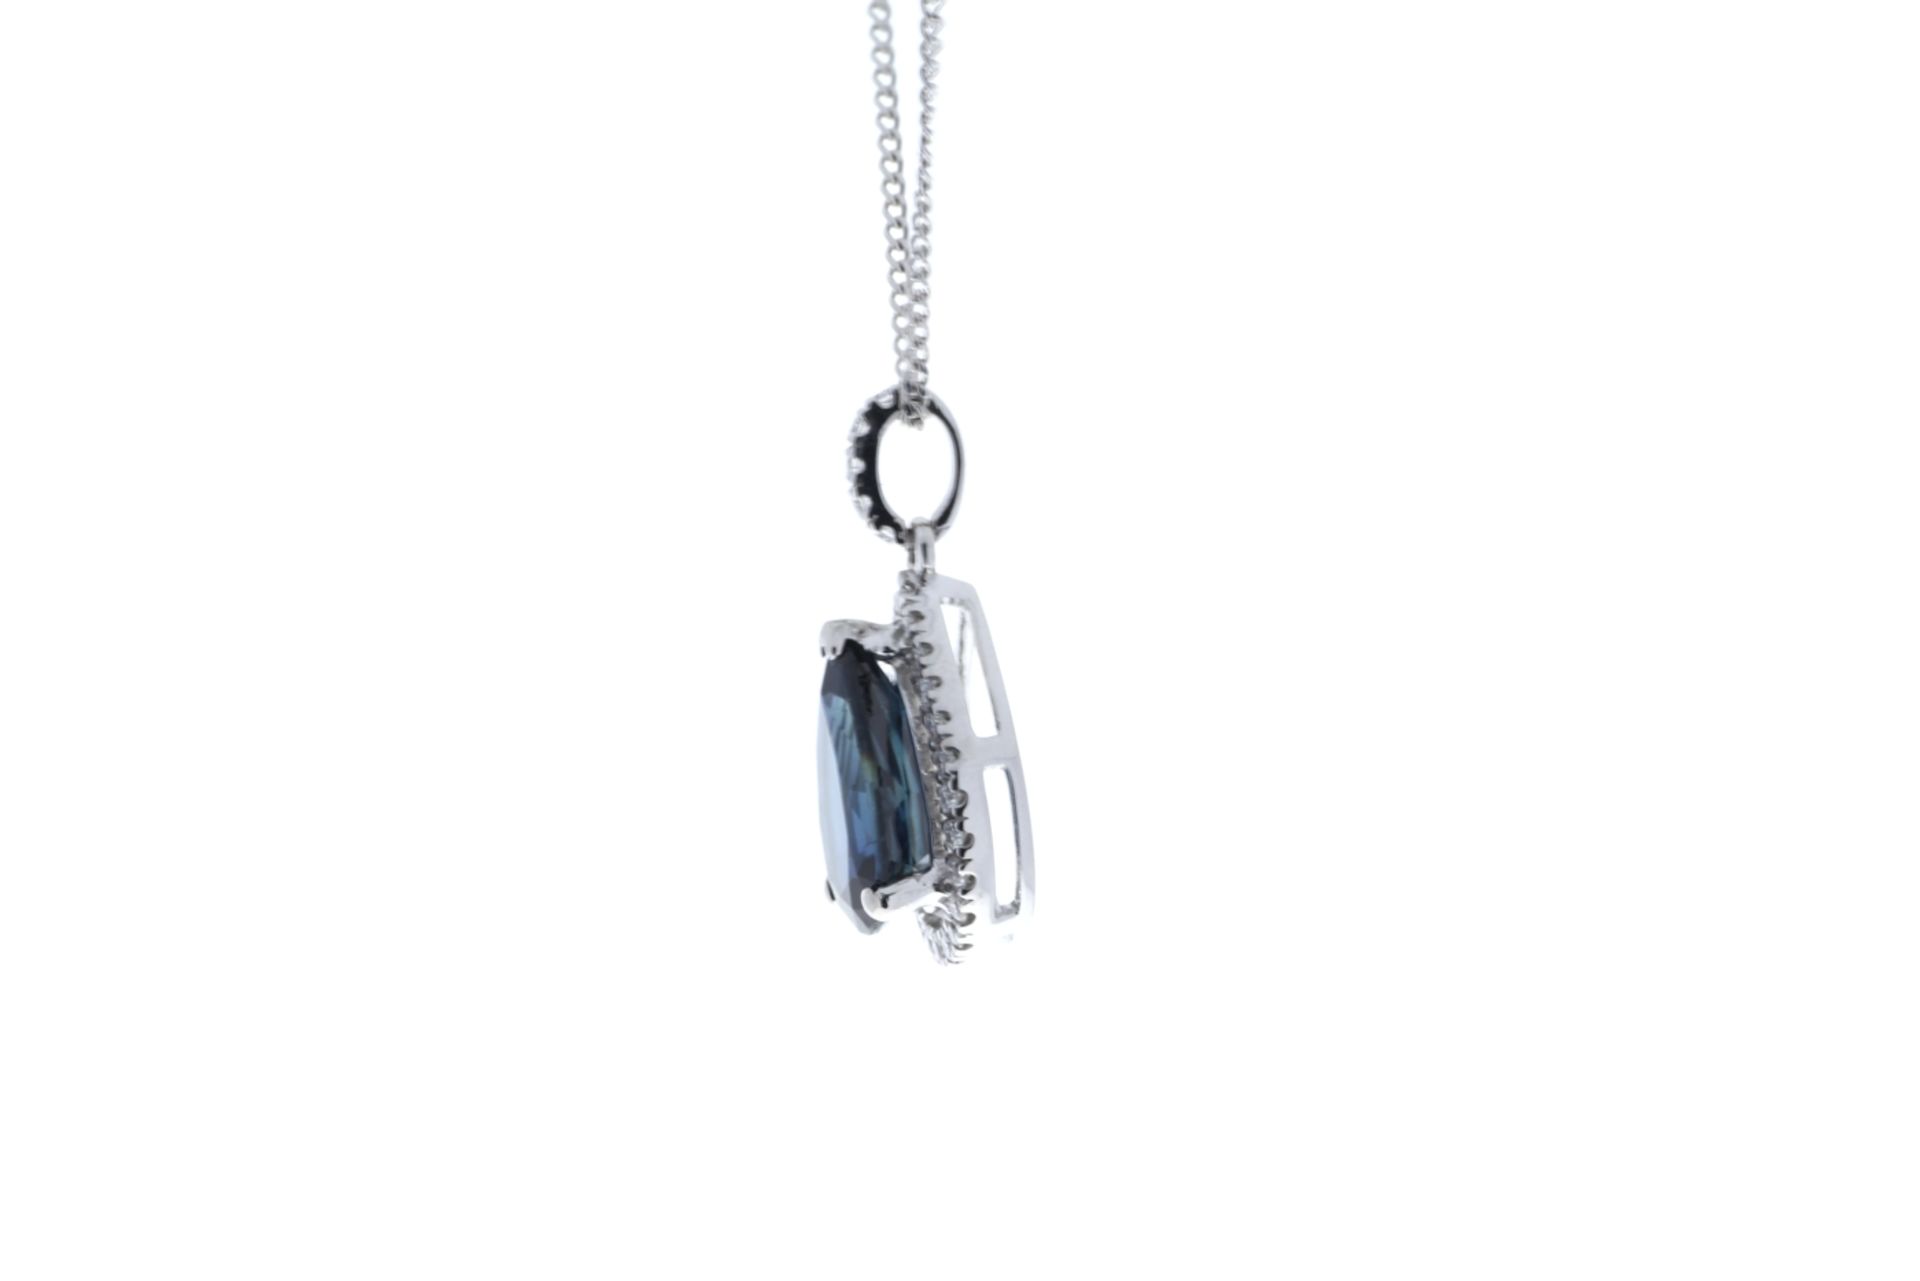 18ct White Gold Diamond And Sapphire Pendant 2.35 Carats - Image 4 of 4